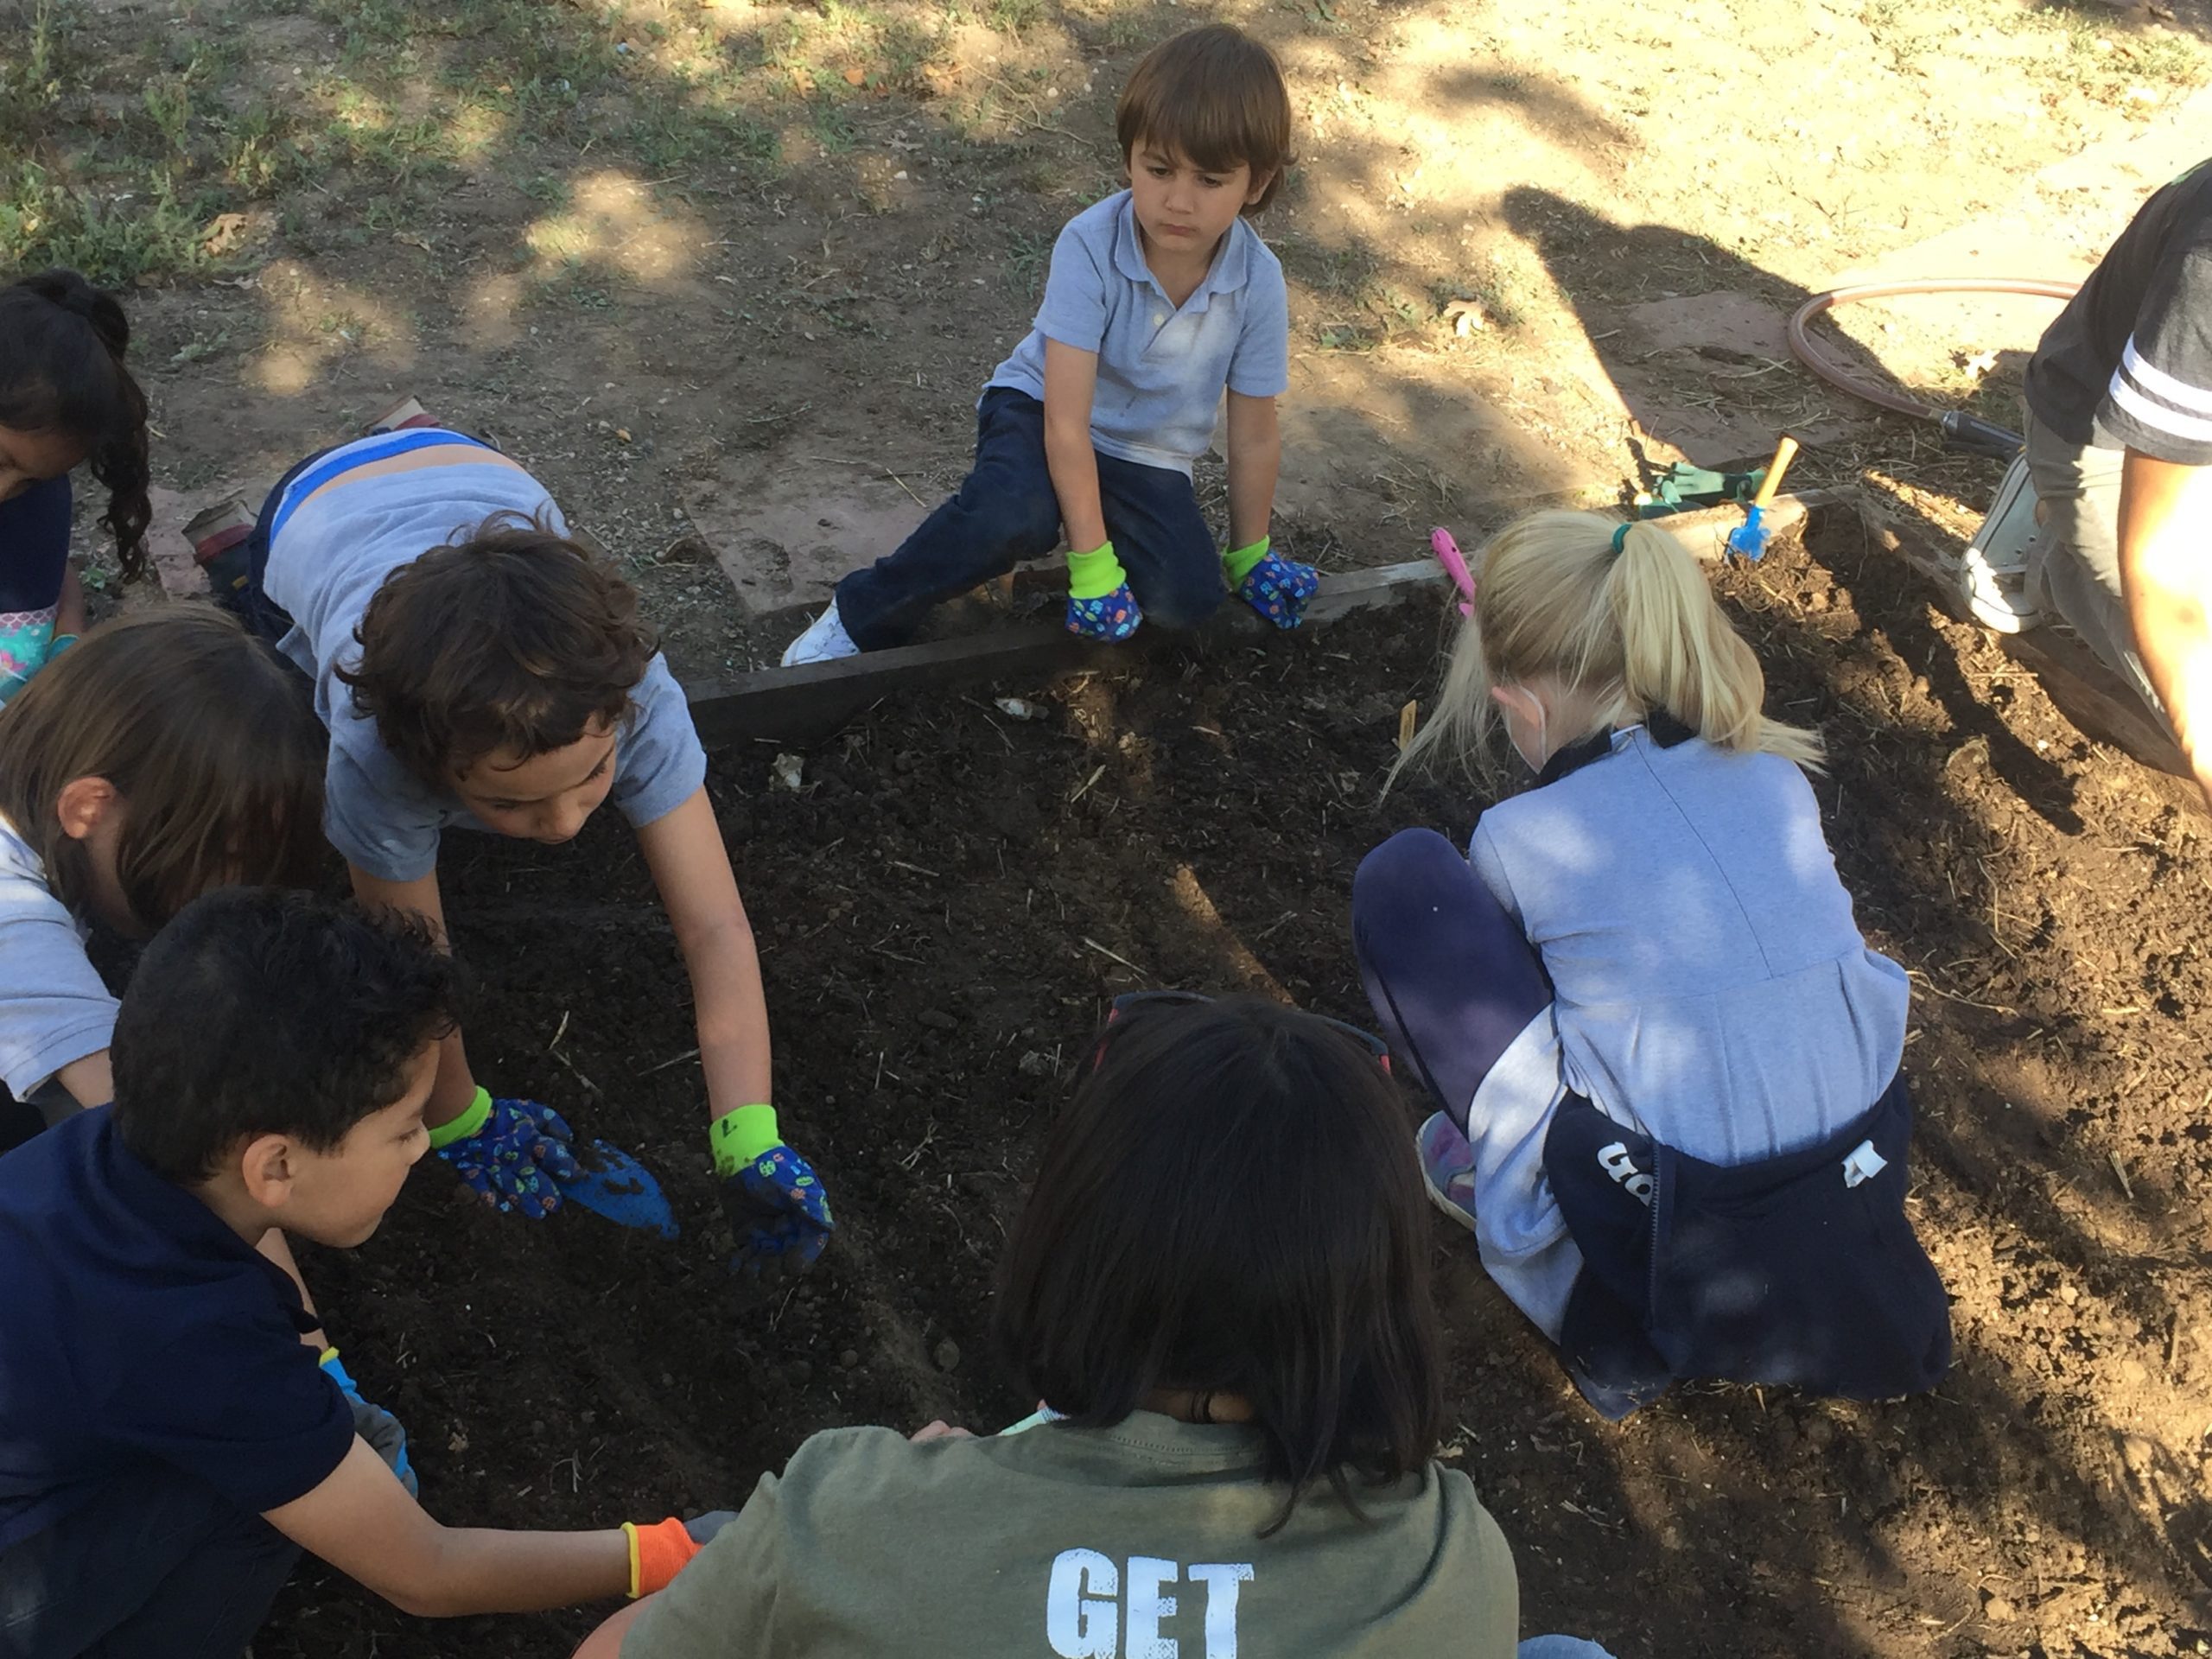 We’re planting seeds with the Semillitas Garden Club!